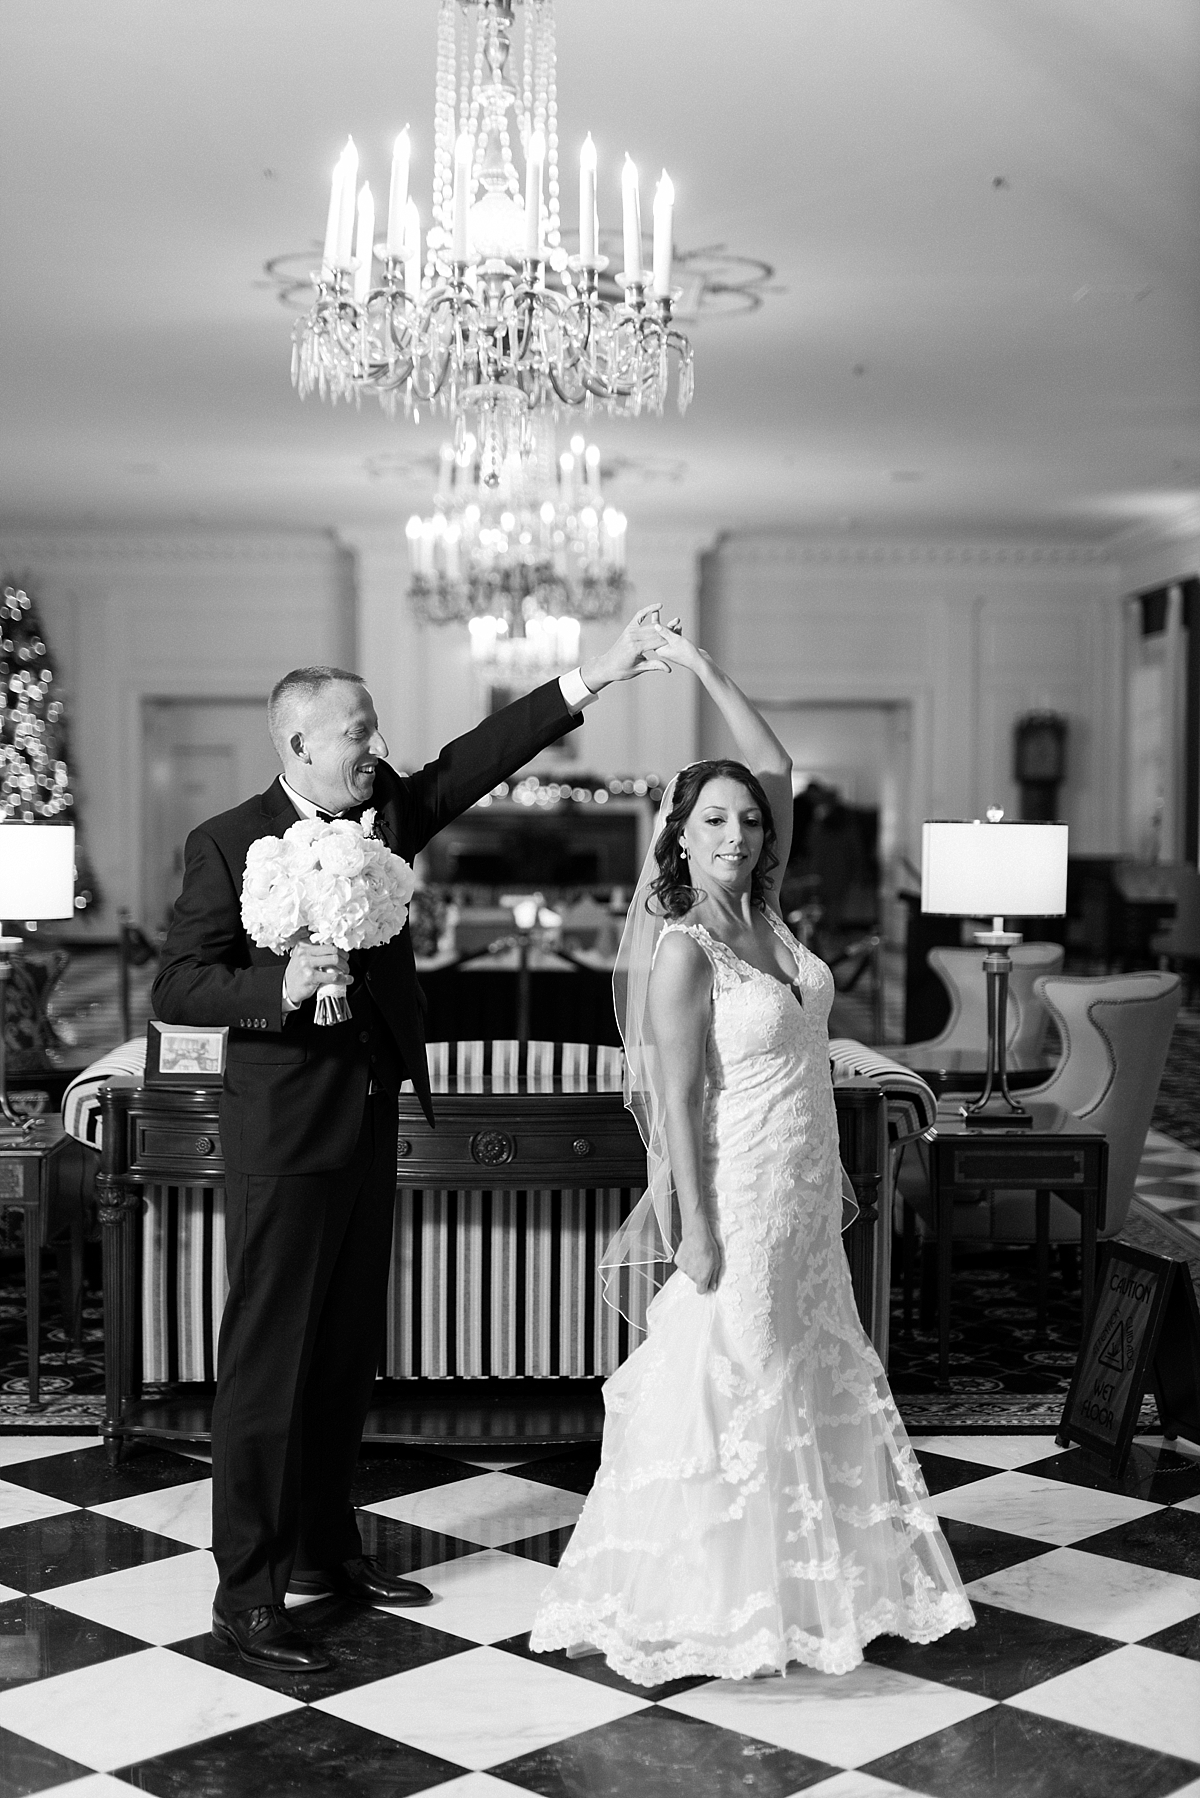 A classic, snowy, winter wedding at the Dearborn Inn near Detroit Michigan by Erika Christine Photography